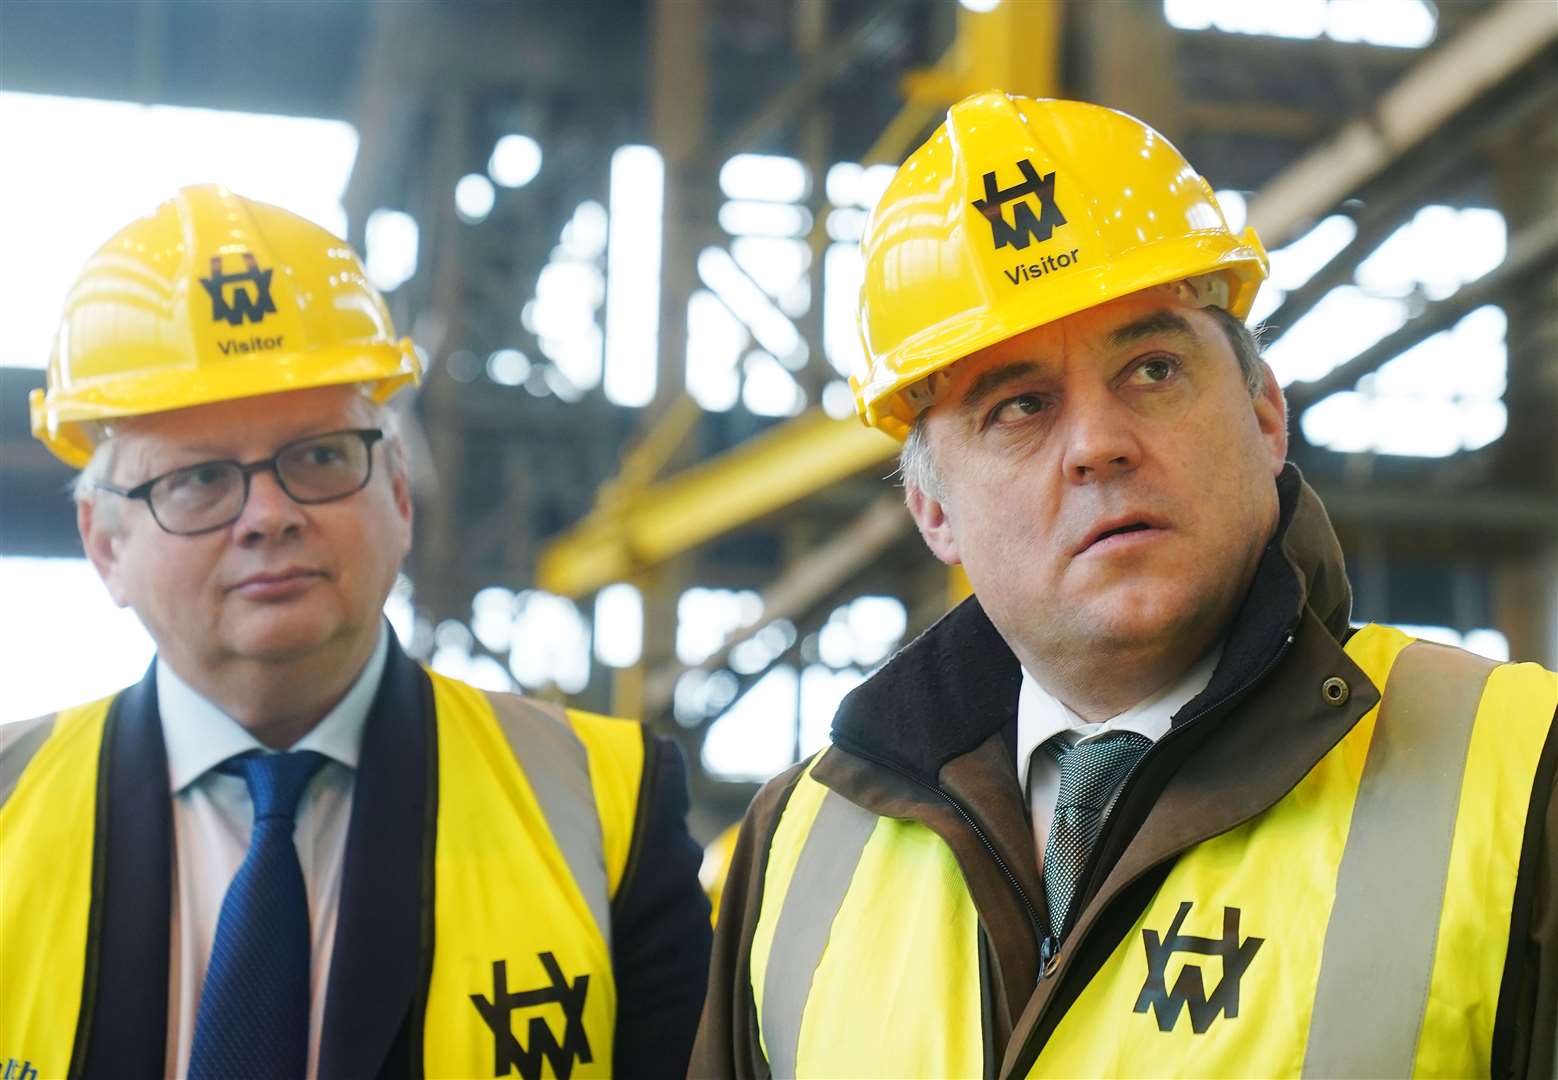 Then defence secretary Ben Wallace (right) with CEO John Wood (left) during a visit to Harland & Wolff shipyard factory in Belfast in January 2023 (Brian Lawless/PA)